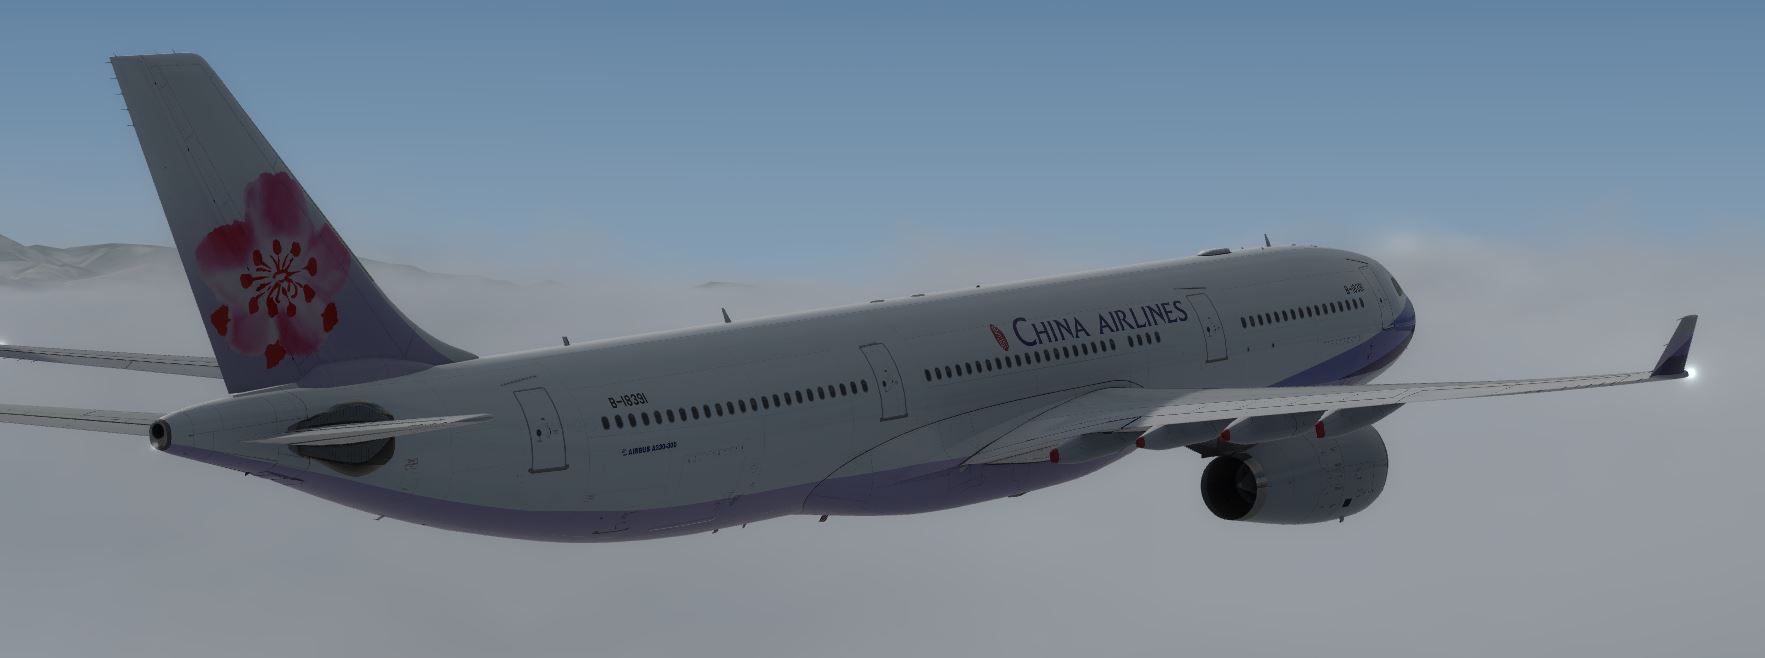 AS A330 ChinaAirline-2588 